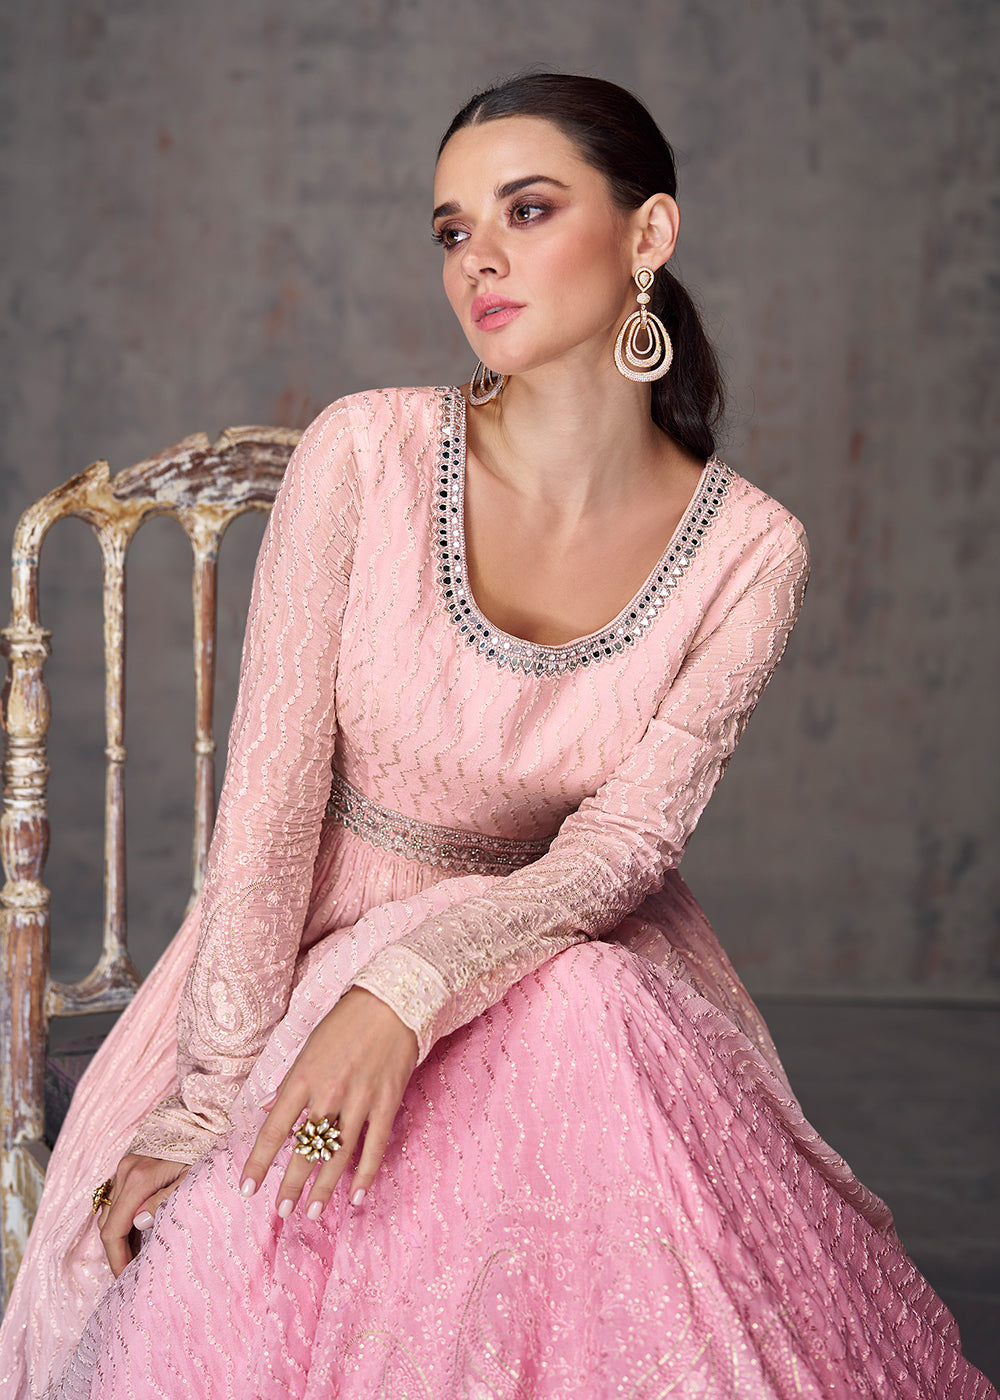 Buy Now Sequins & Faux Mirror Embroidered Indian Wedding Gown in Pink Online in USA, UK, Australia, Canada & Worldwide at Empress Clothing.